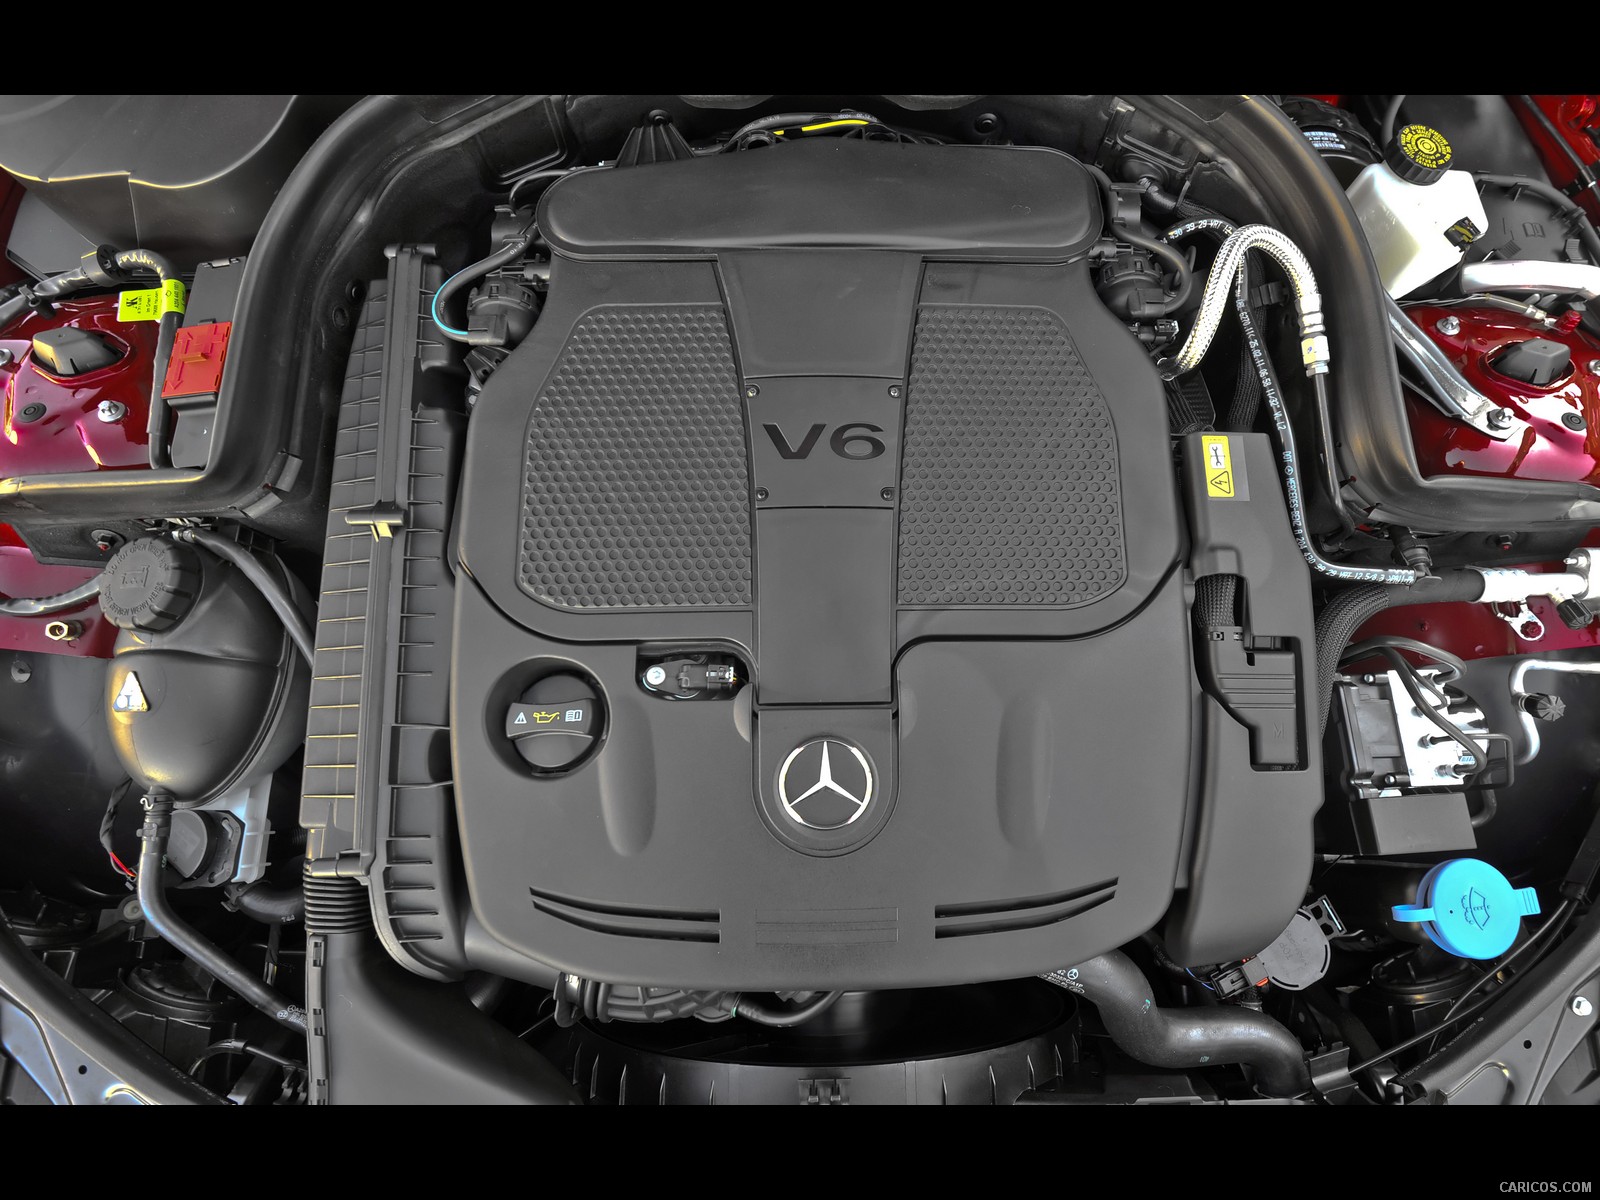 Mercedes-Benz C-Class Coupe (2012)  - Engine, #79 of 79